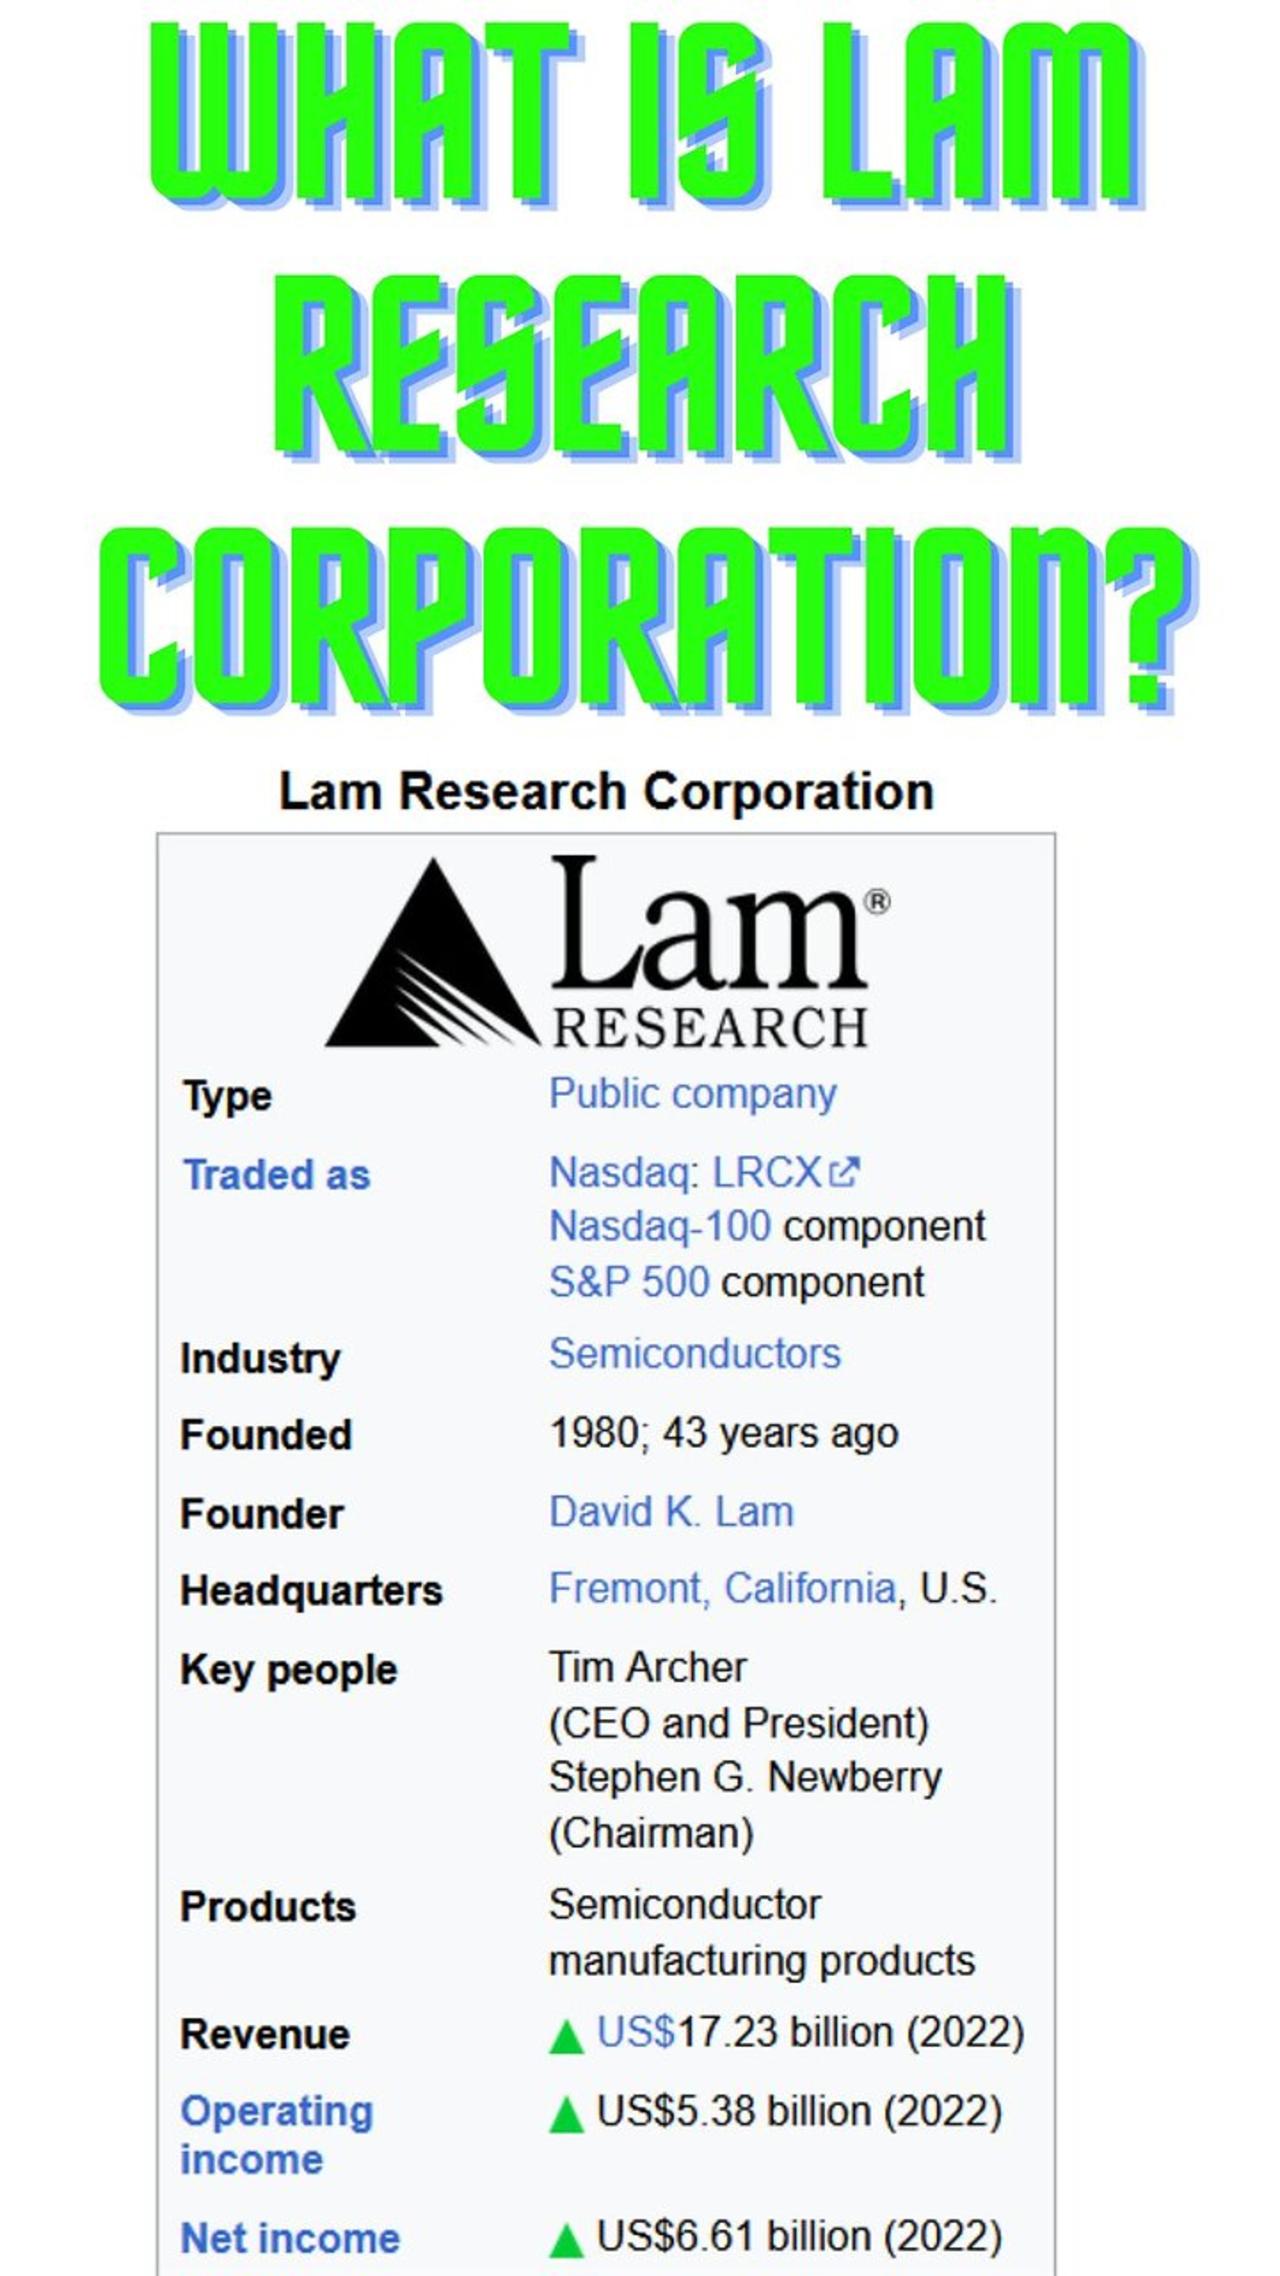 What is Lam Research Corporation?